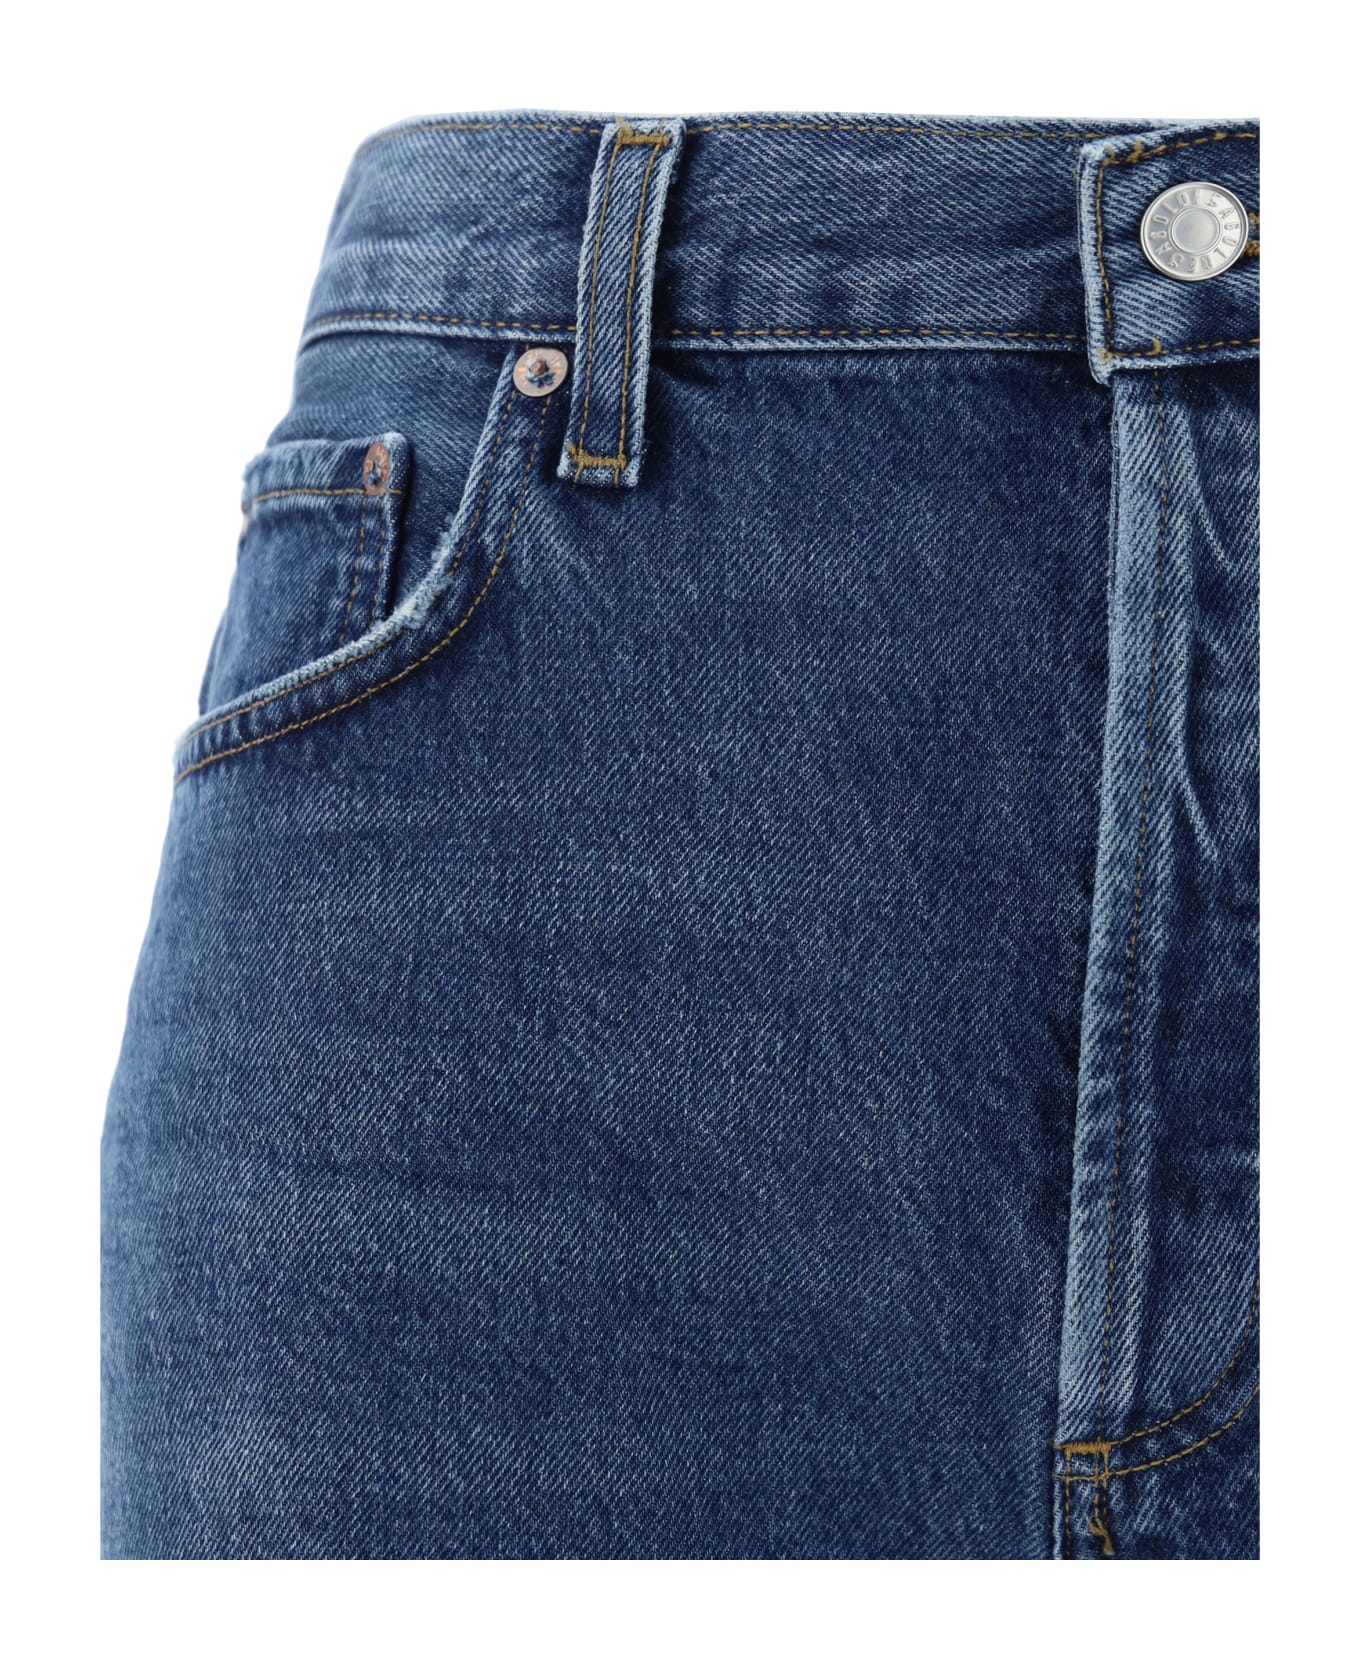 AGOLDE Jeans - Image